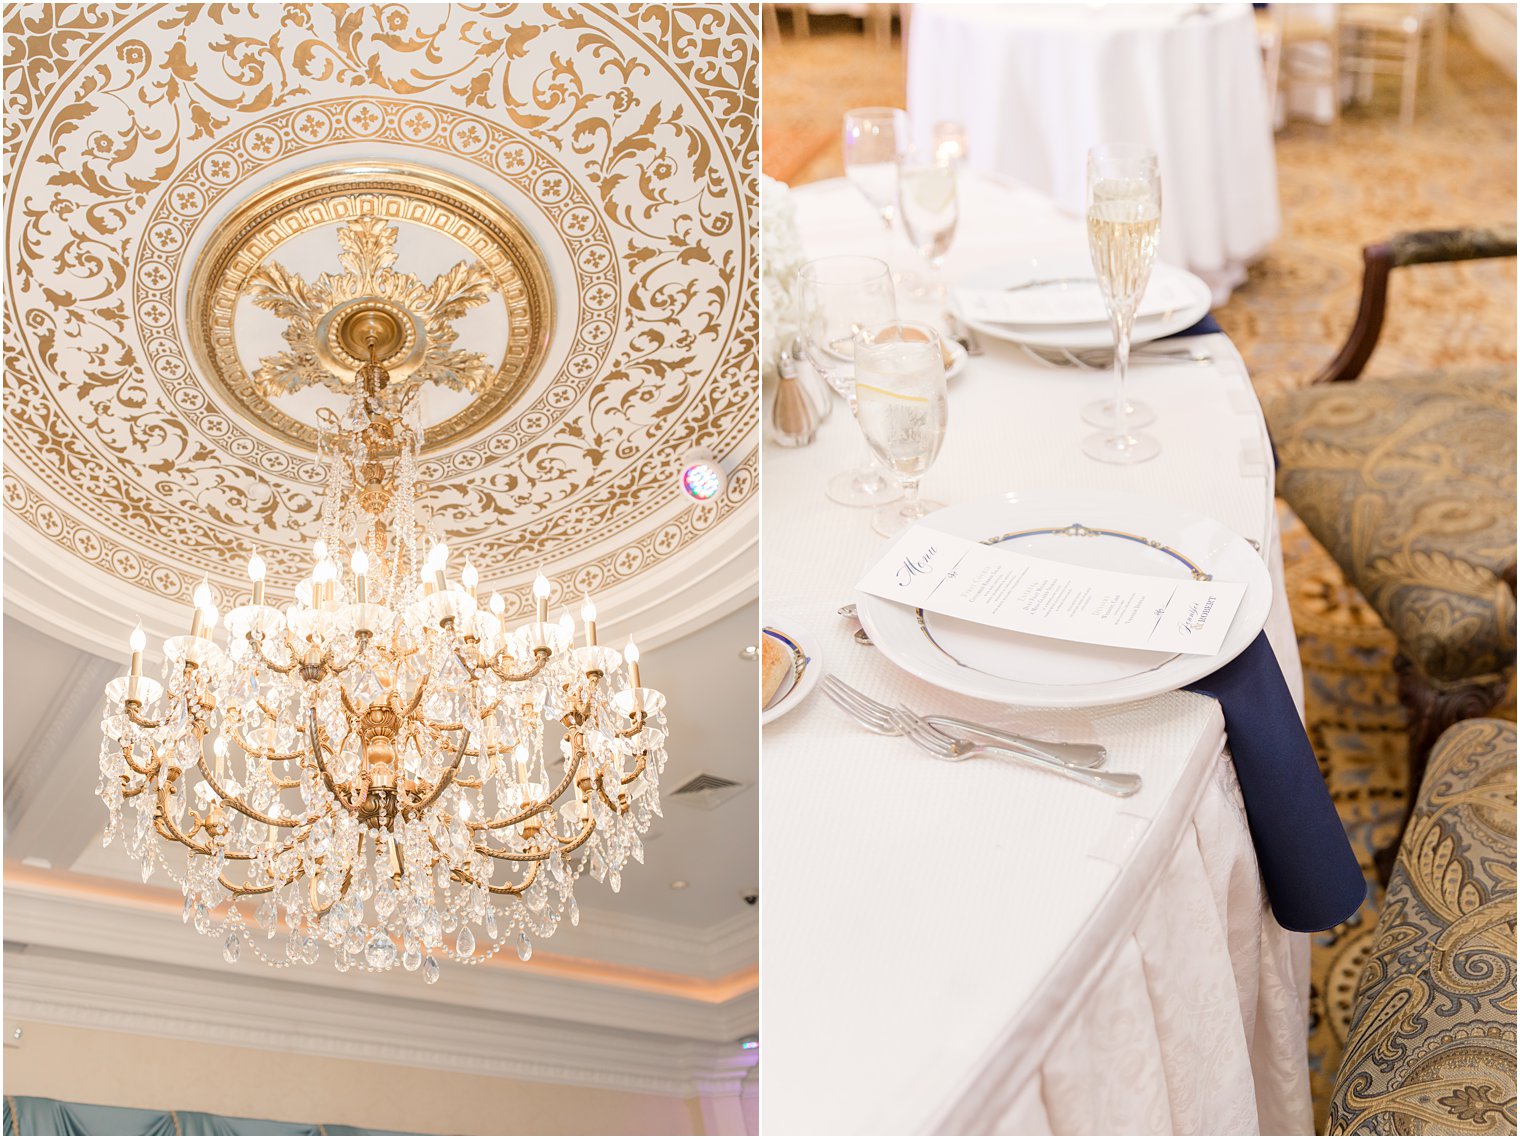 Farmingdale NJ wedding reception details with gold and white